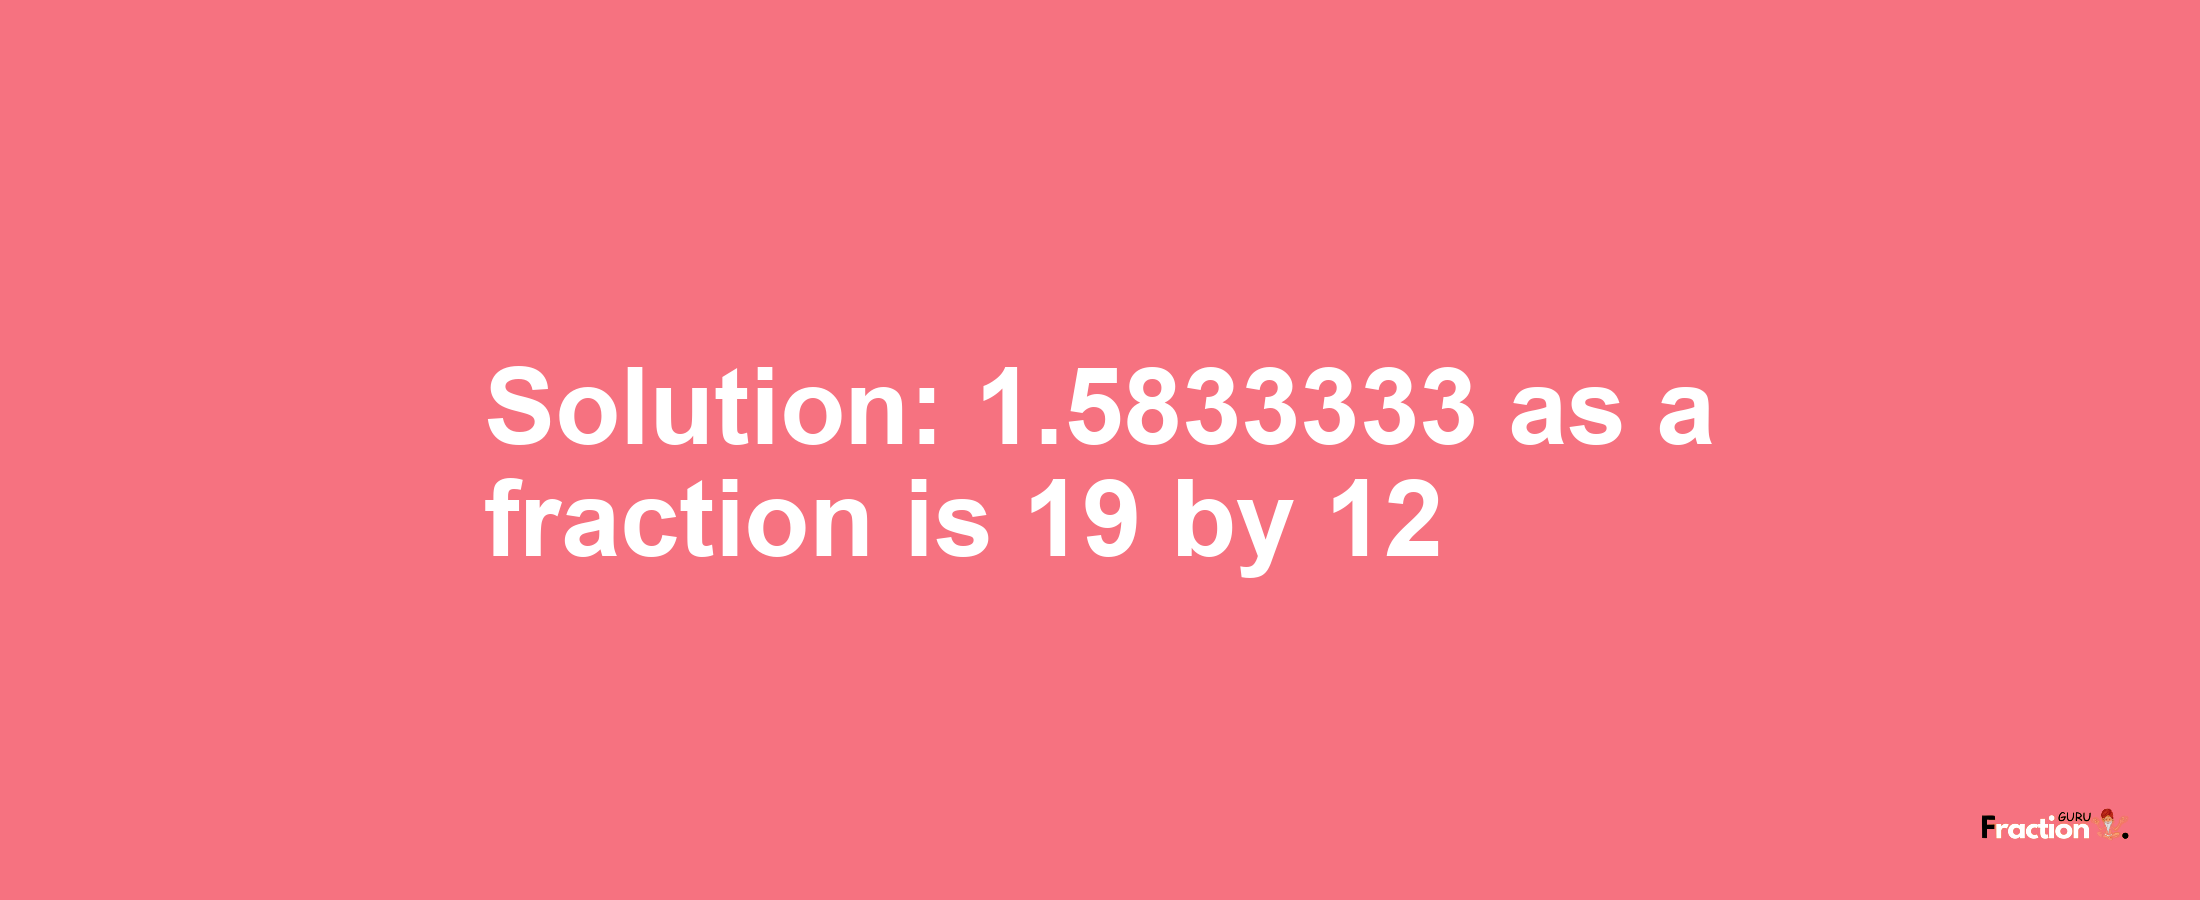 Solution:1.5833333 as a fraction is 19/12